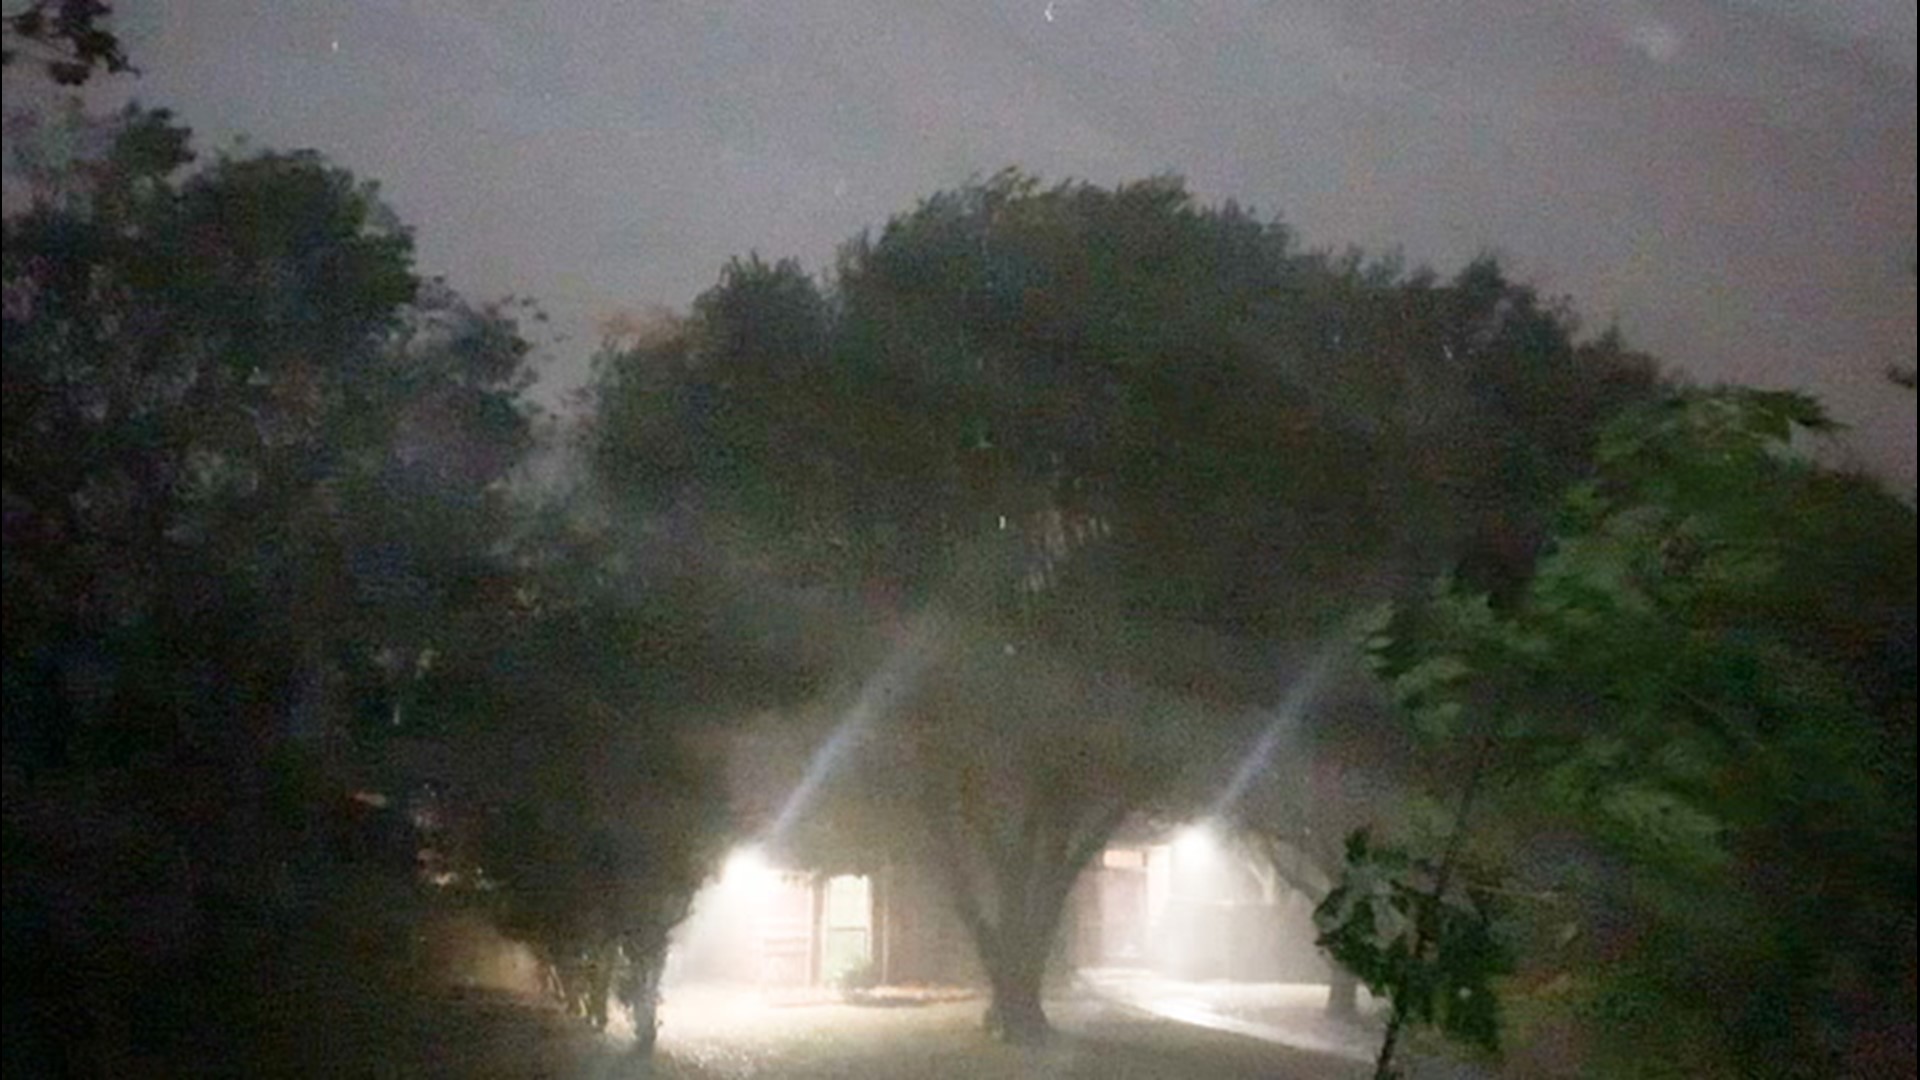 Thunderstorms hit Bill Wadell's neighborhood only about ten minutes after a tornado warning expired in Dallas County, Texas, the night of Nov. 24.